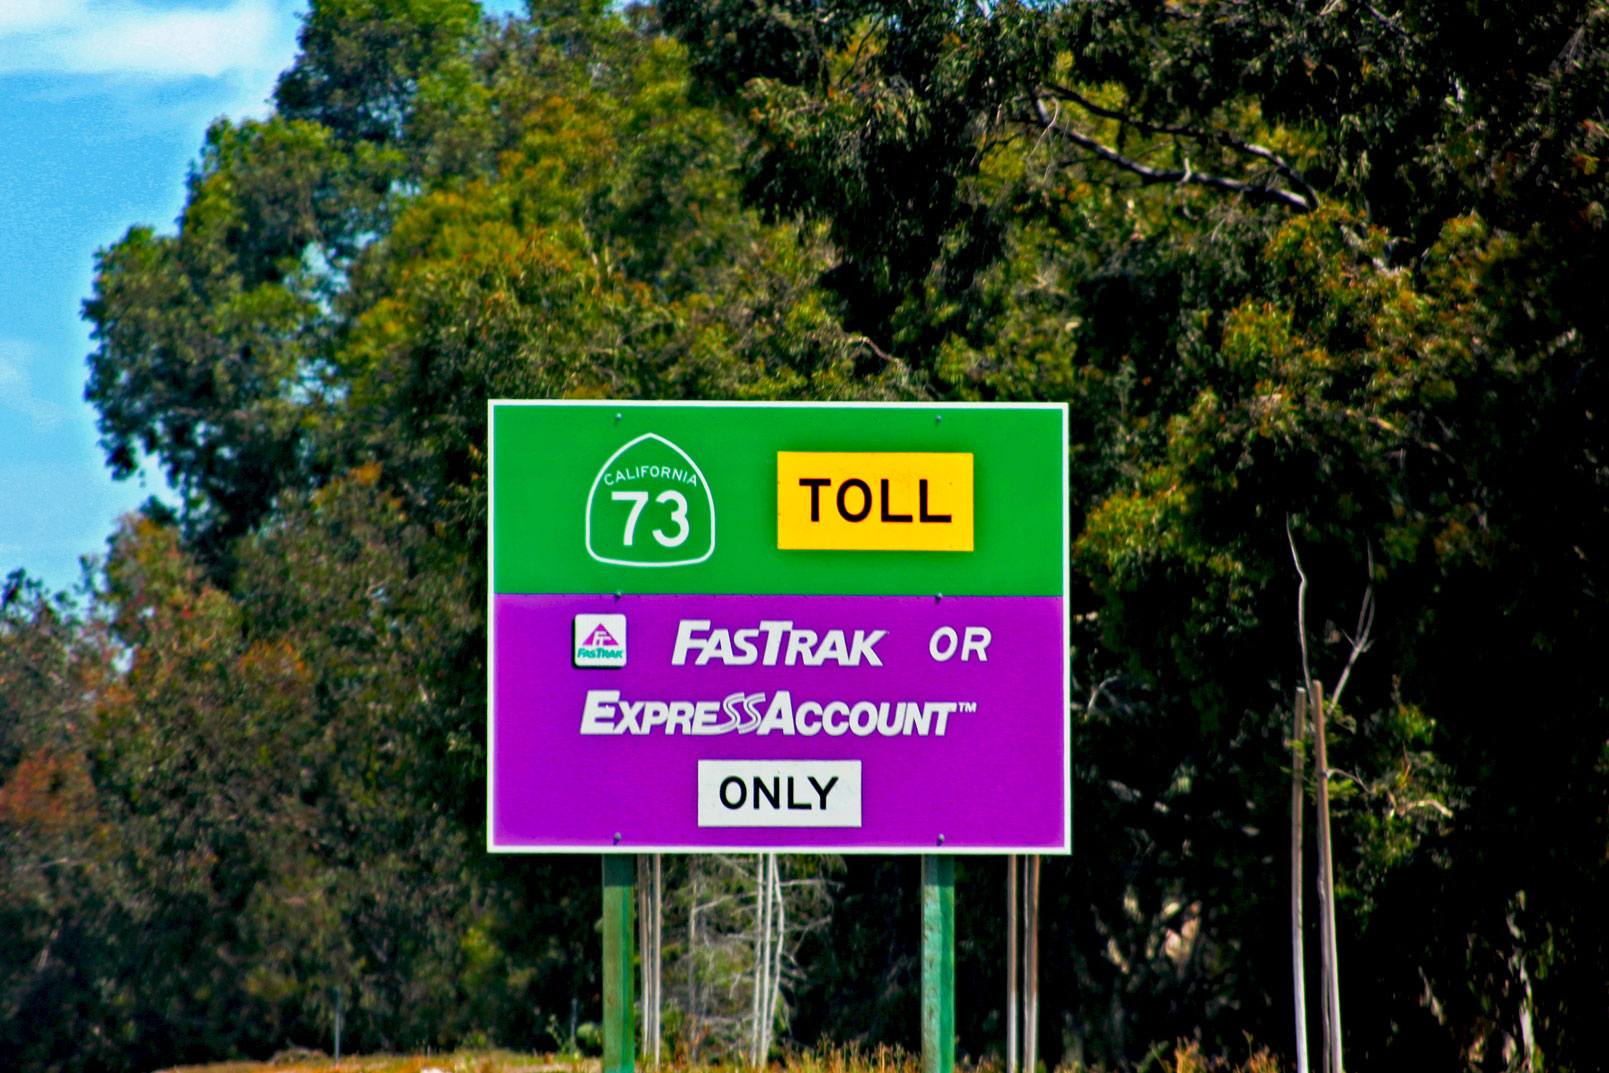 What are FasTrak toll roads?